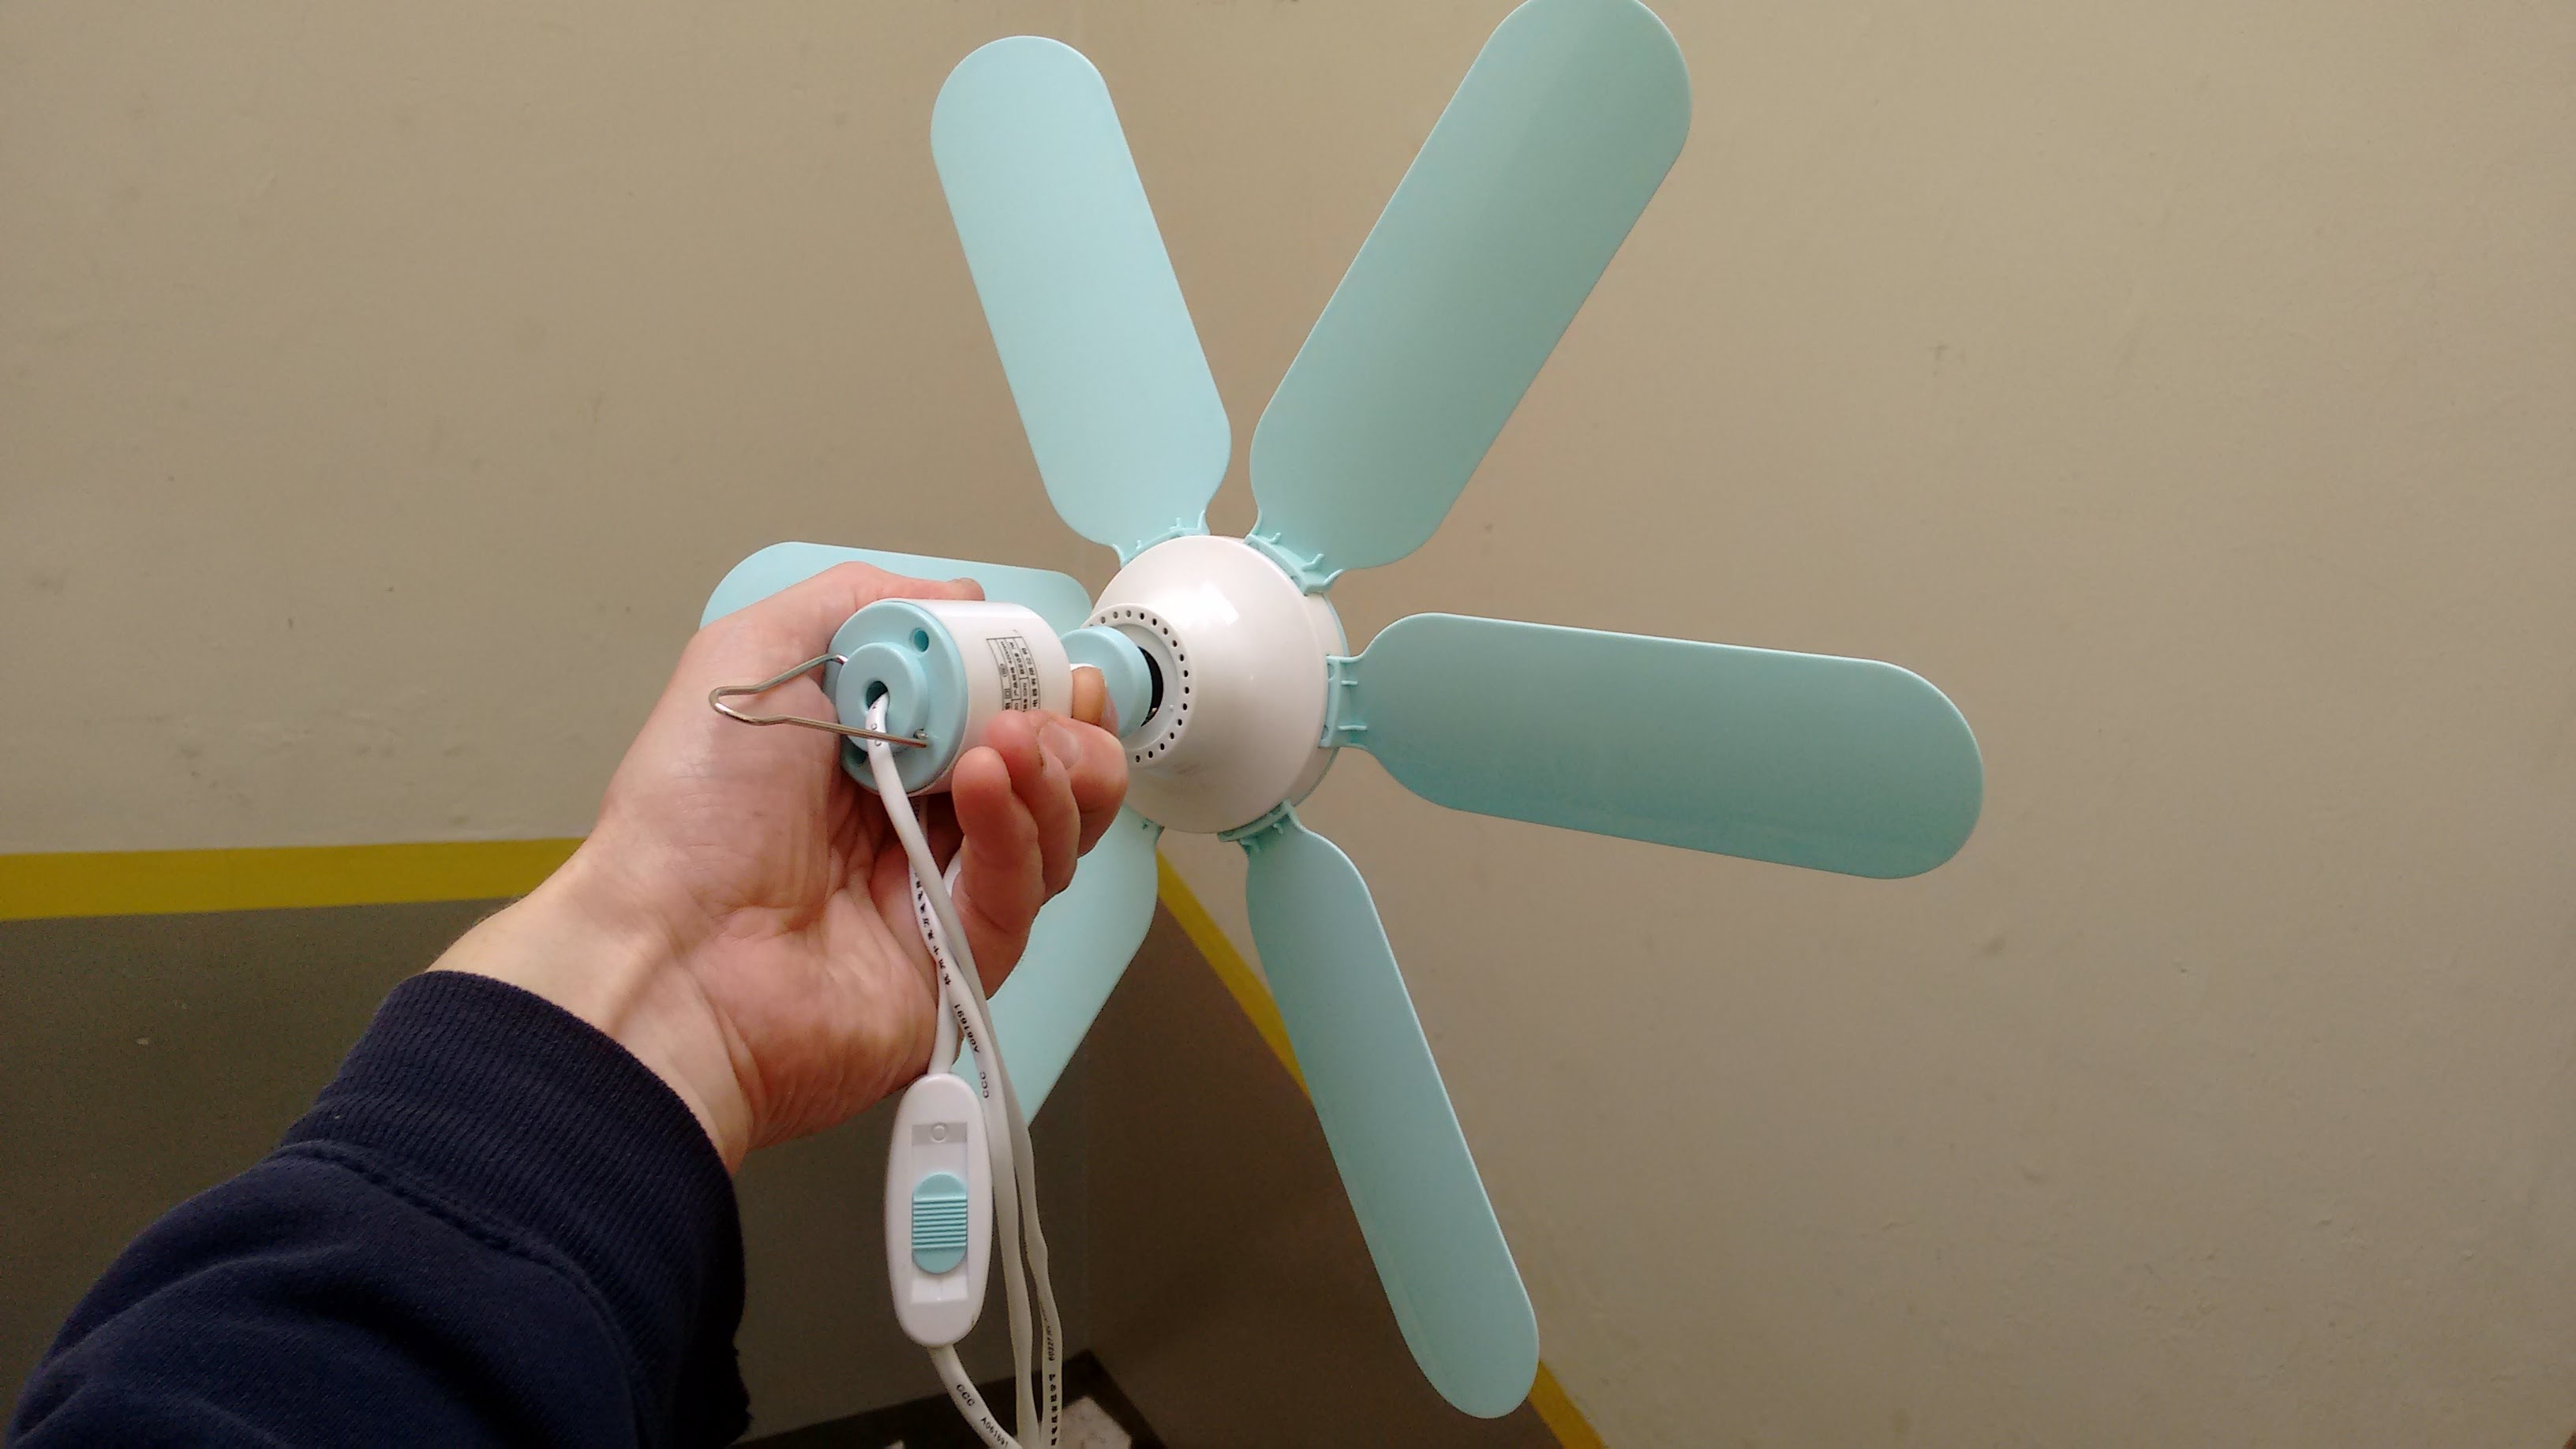 Mini Ceiling Fan With Intriguing Motor And Wind Turbine